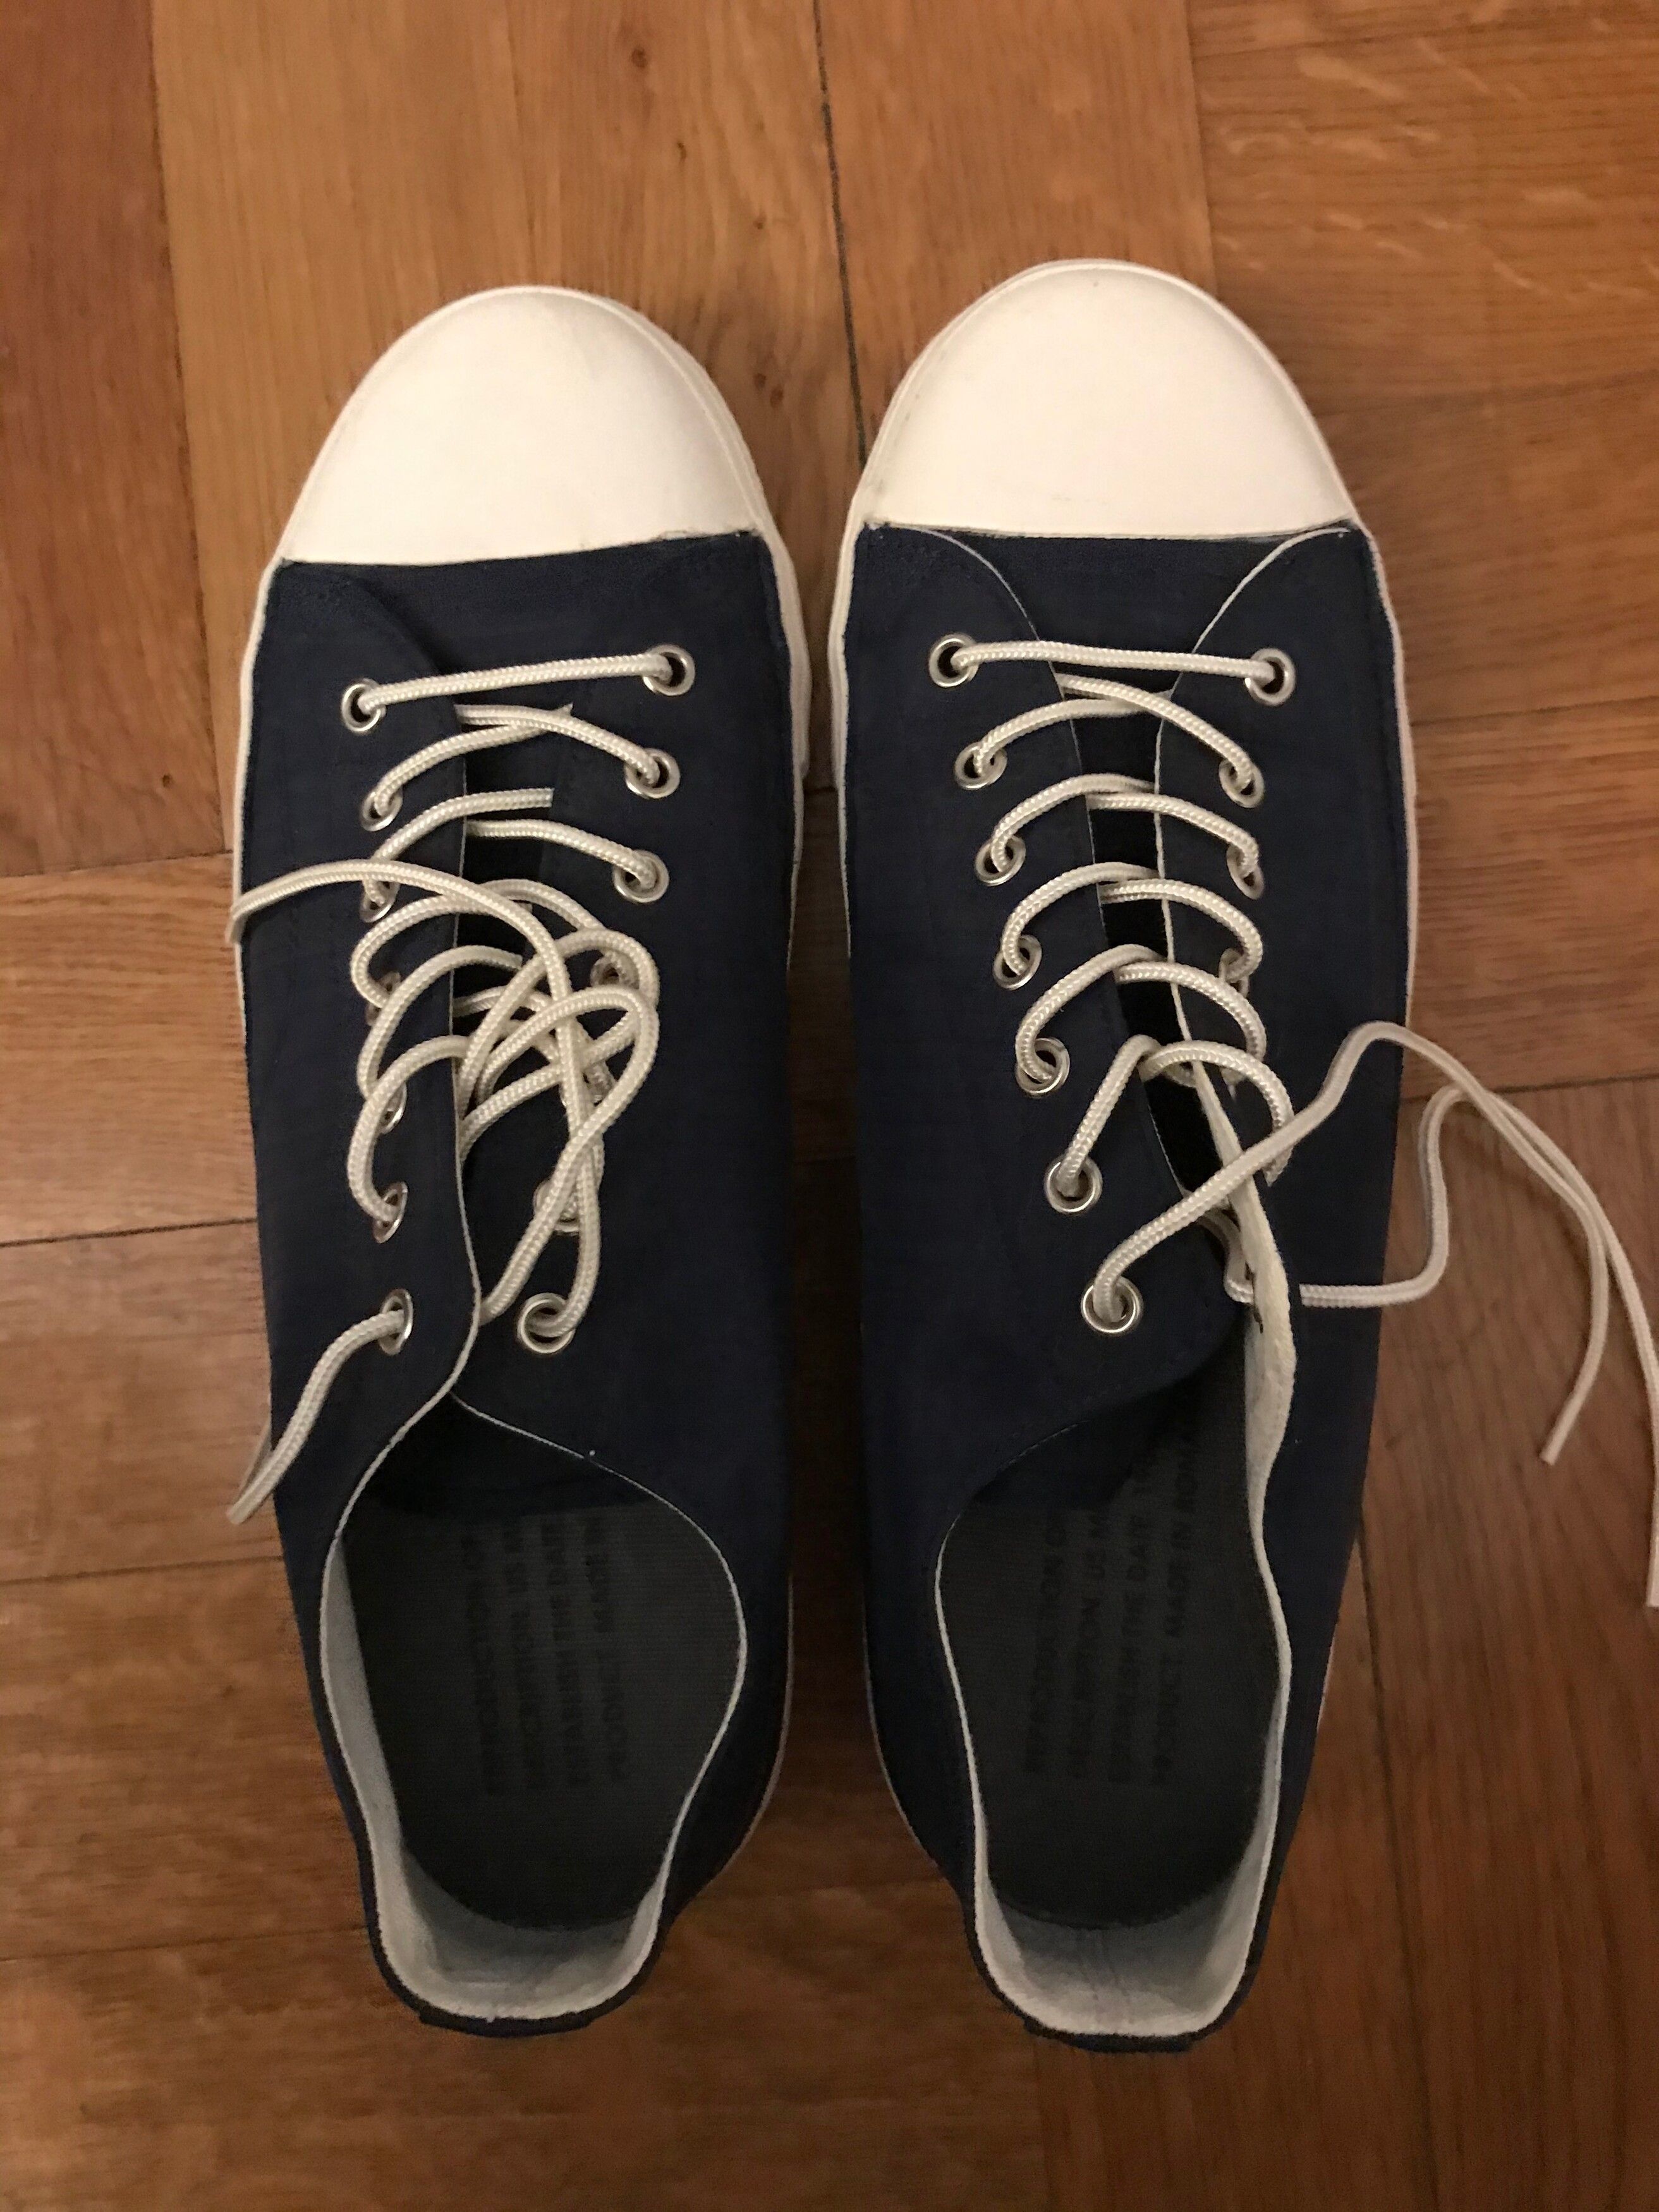 Reproduction of Found 1980 US NAVY MILITARY TRAINER | Grailed